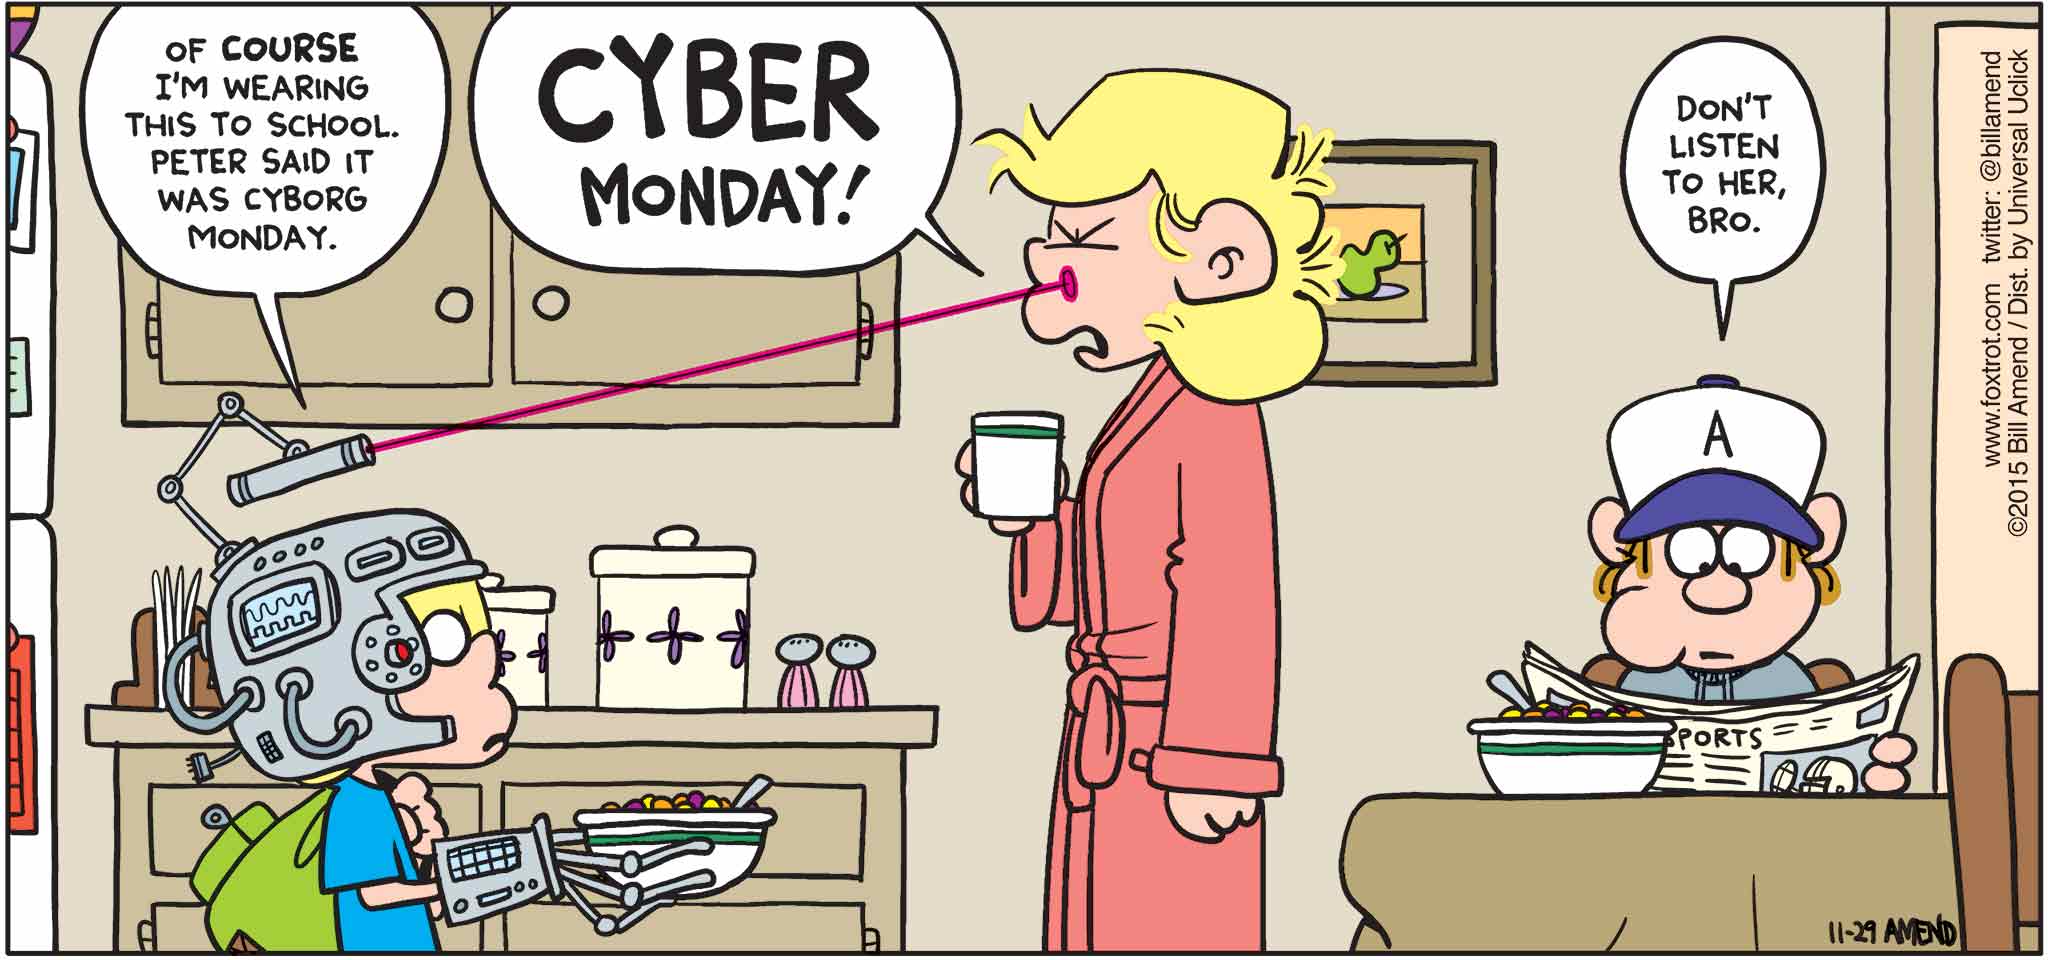 FoxTrot by Bill Amend - "Cyborg Monday" published November 29, 2015 - Jason: Of course I'm wearing this to school. Peter said it was Cyborg Monday. Andy: CYBER MONDAY! Peter: Don't listen to her, bro.